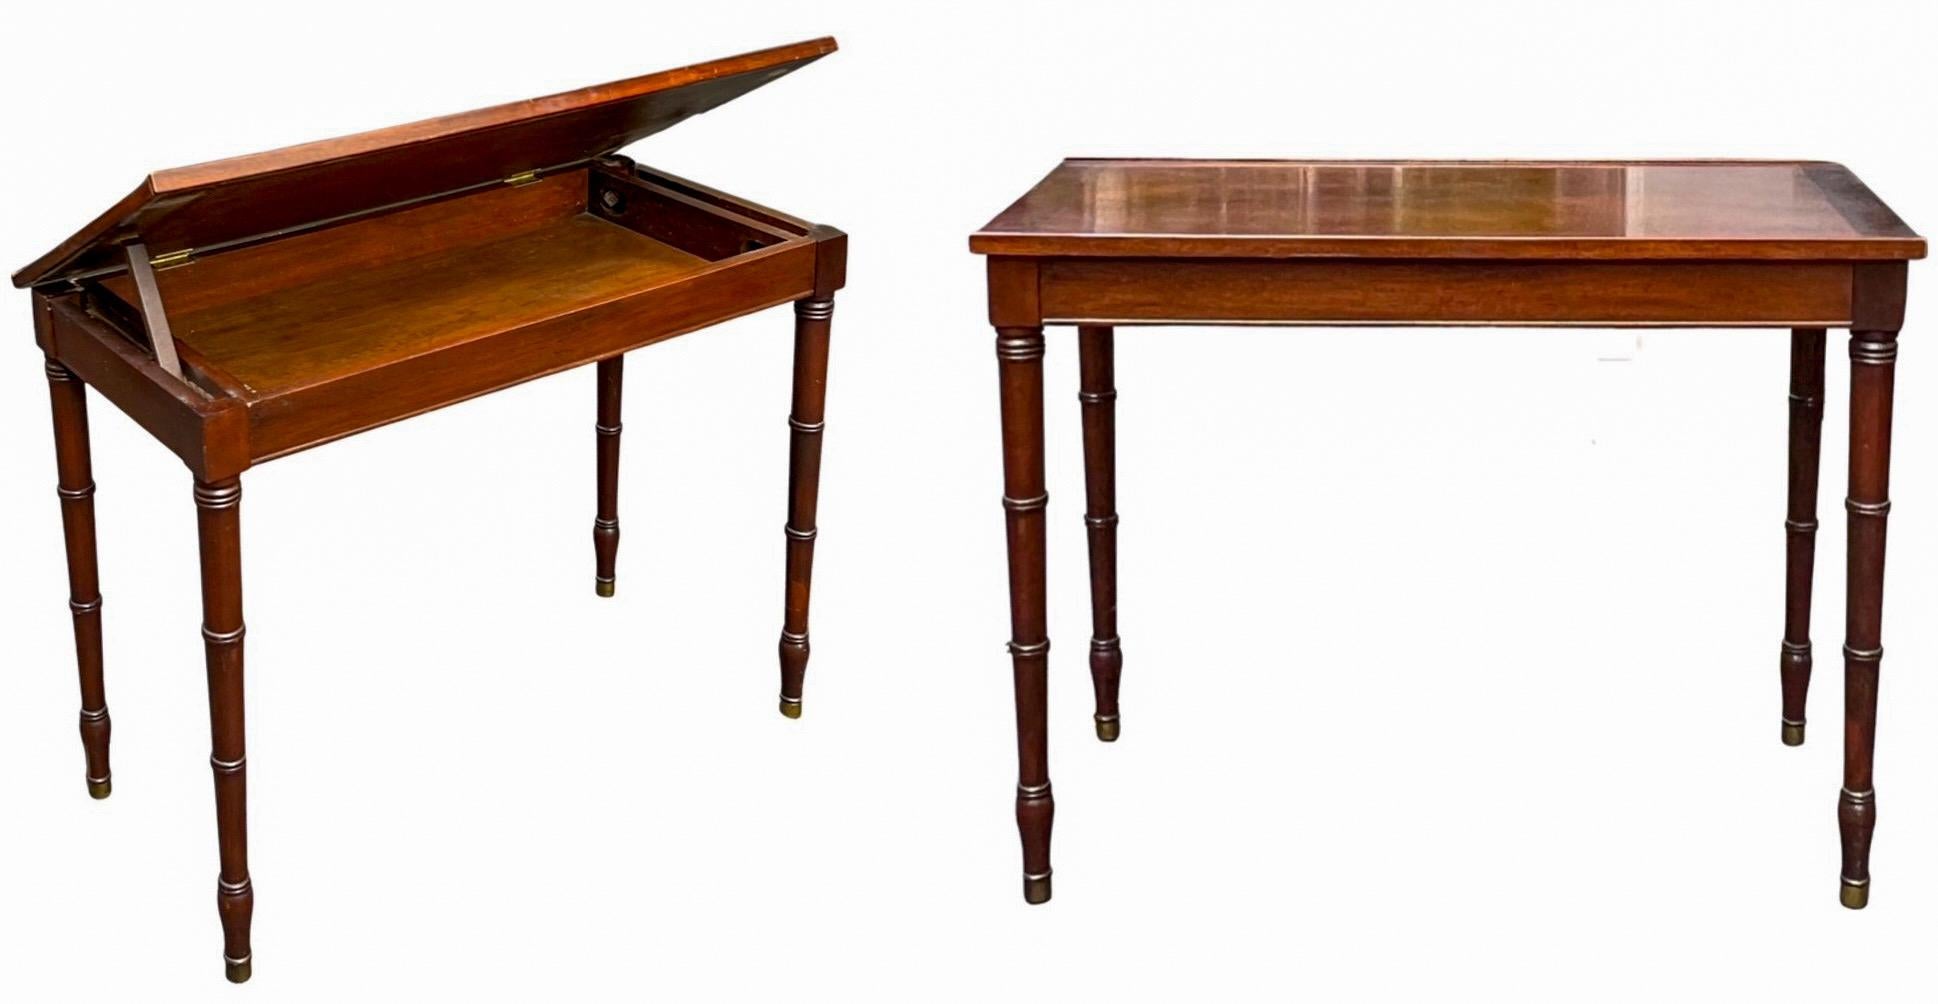 19th-C. English Regency Mahogany Lift Top Faux Bamboo Side / Console Tables -S/2 3